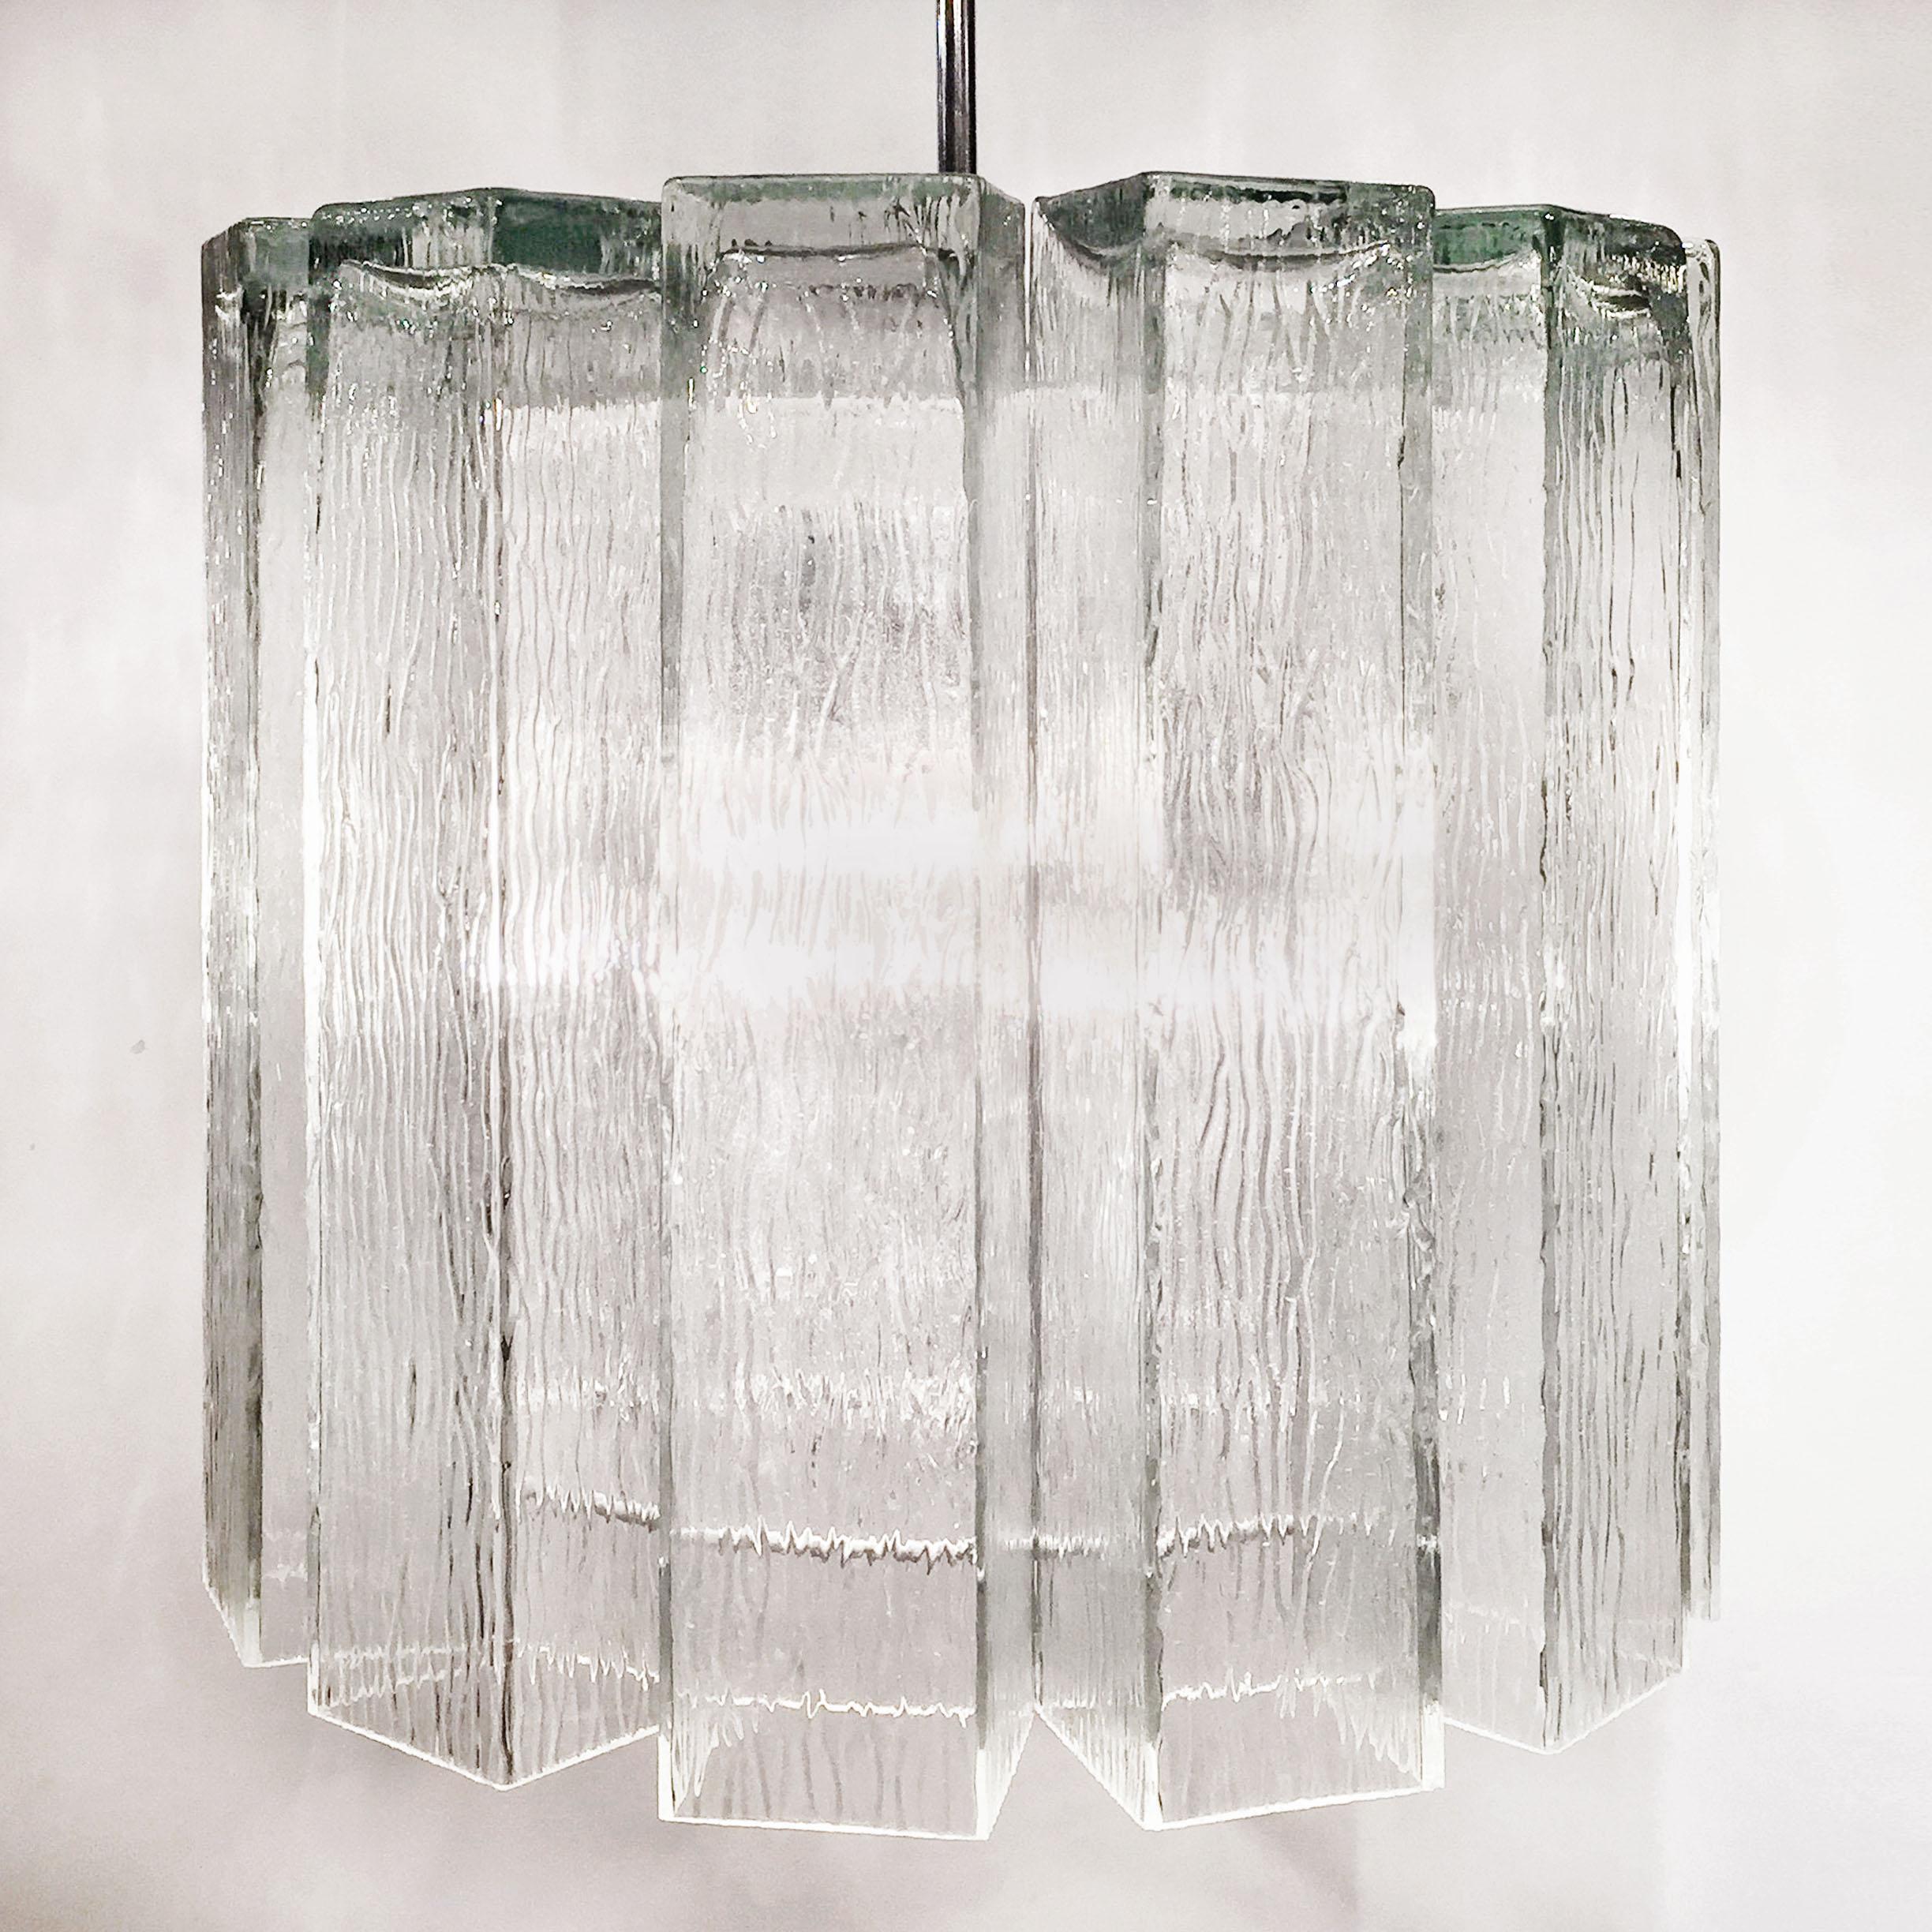 These exquisite 1970s Doria chandeliers feature 12 rectangular ice glass crystals that hang from a ring shaped fixture, centred by a chrome rod. Each fixture is equipped with 4 sockets.